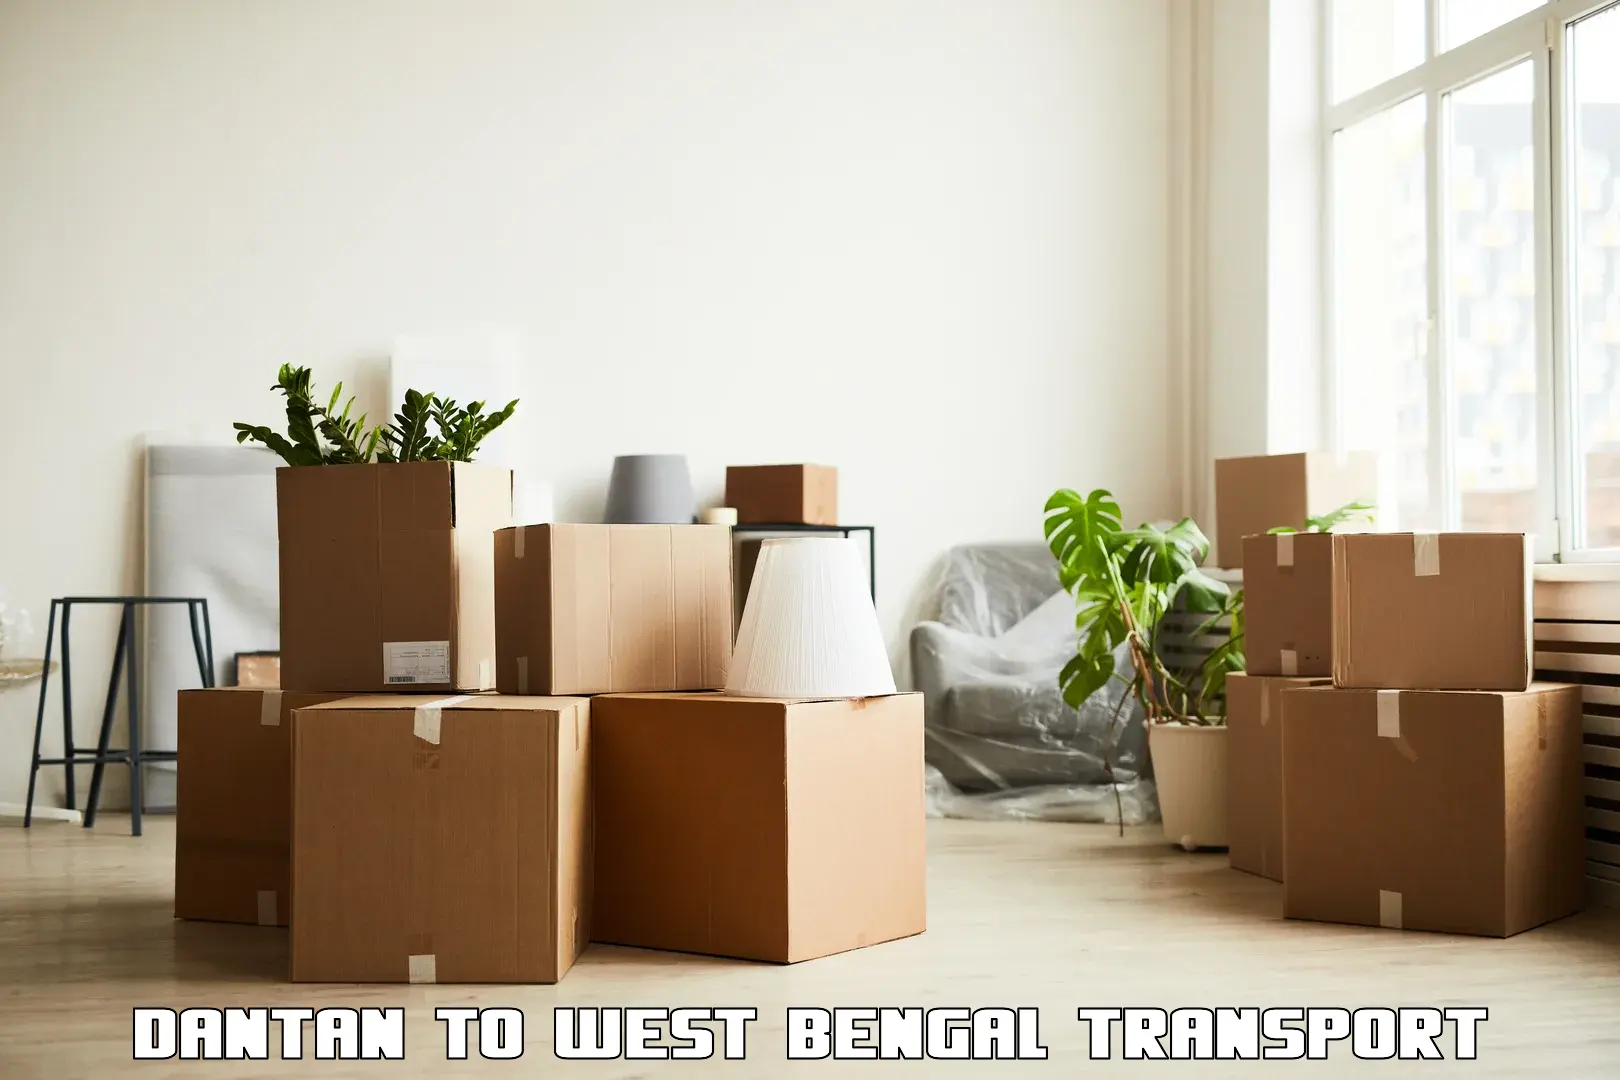 Delivery service Dantan to West Bengal